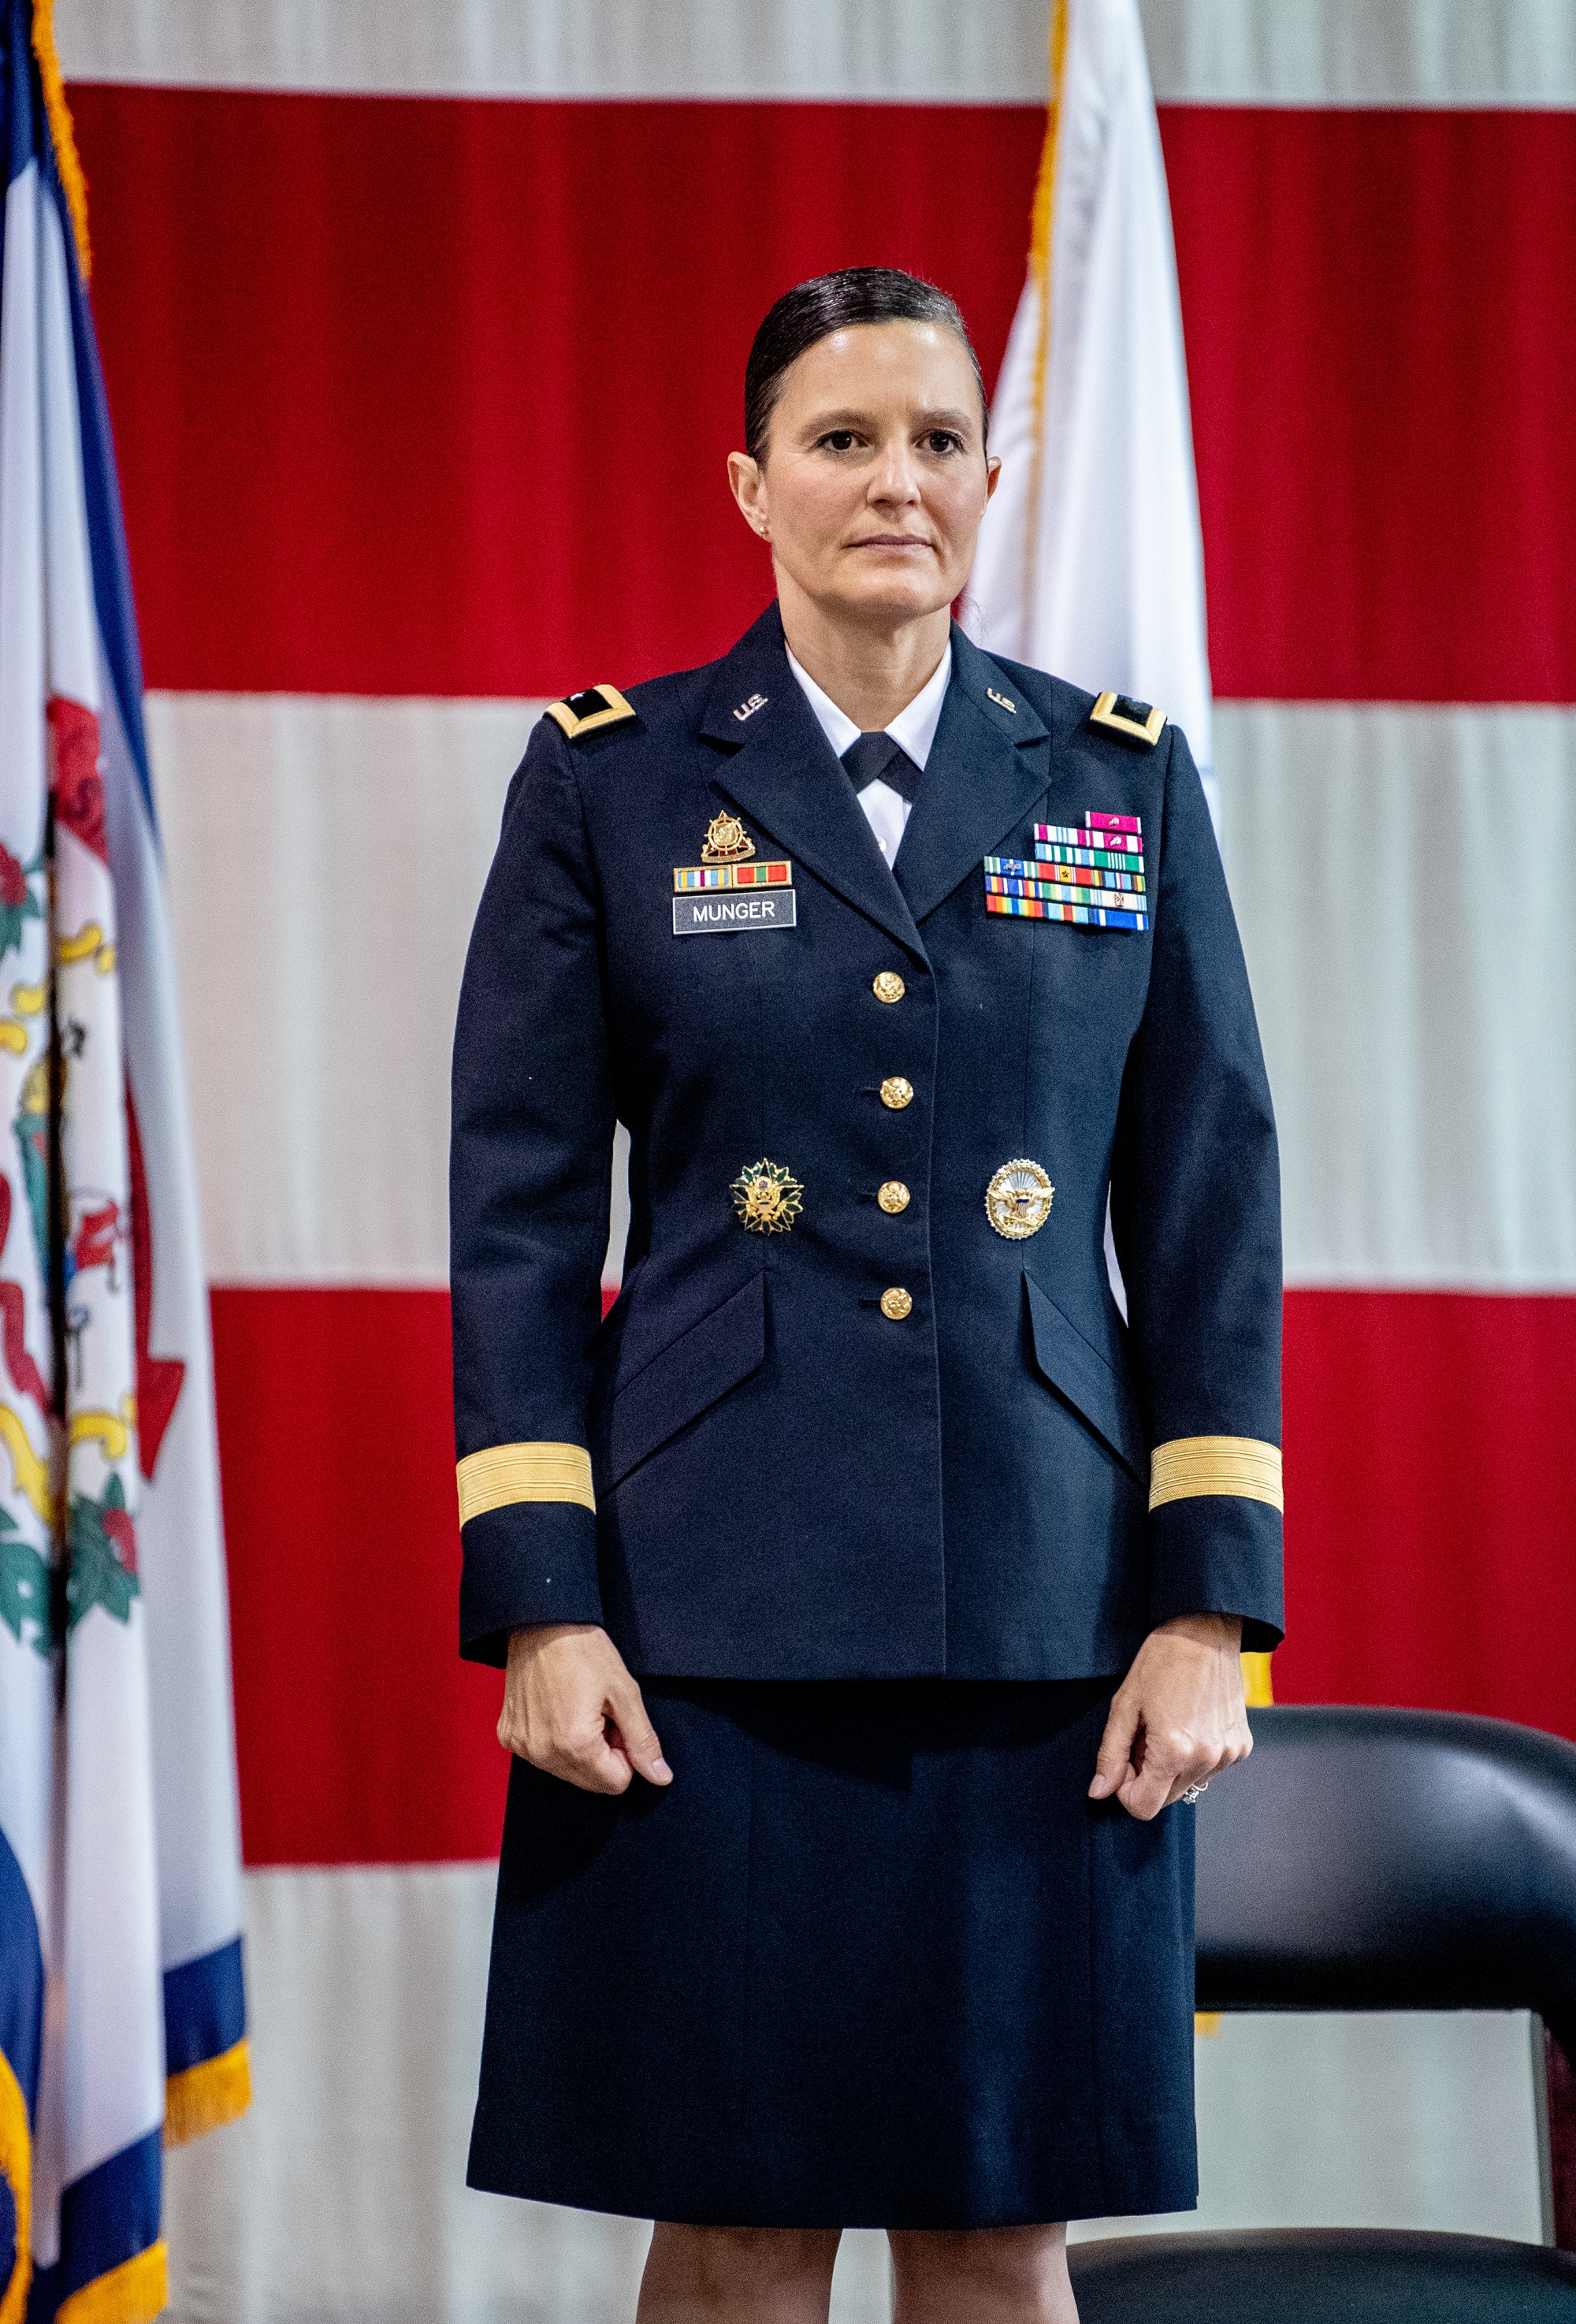 DVIDS - Images - W.Va. Army National Guard promotes first female general  officer in state's history [Image 4 of 8]